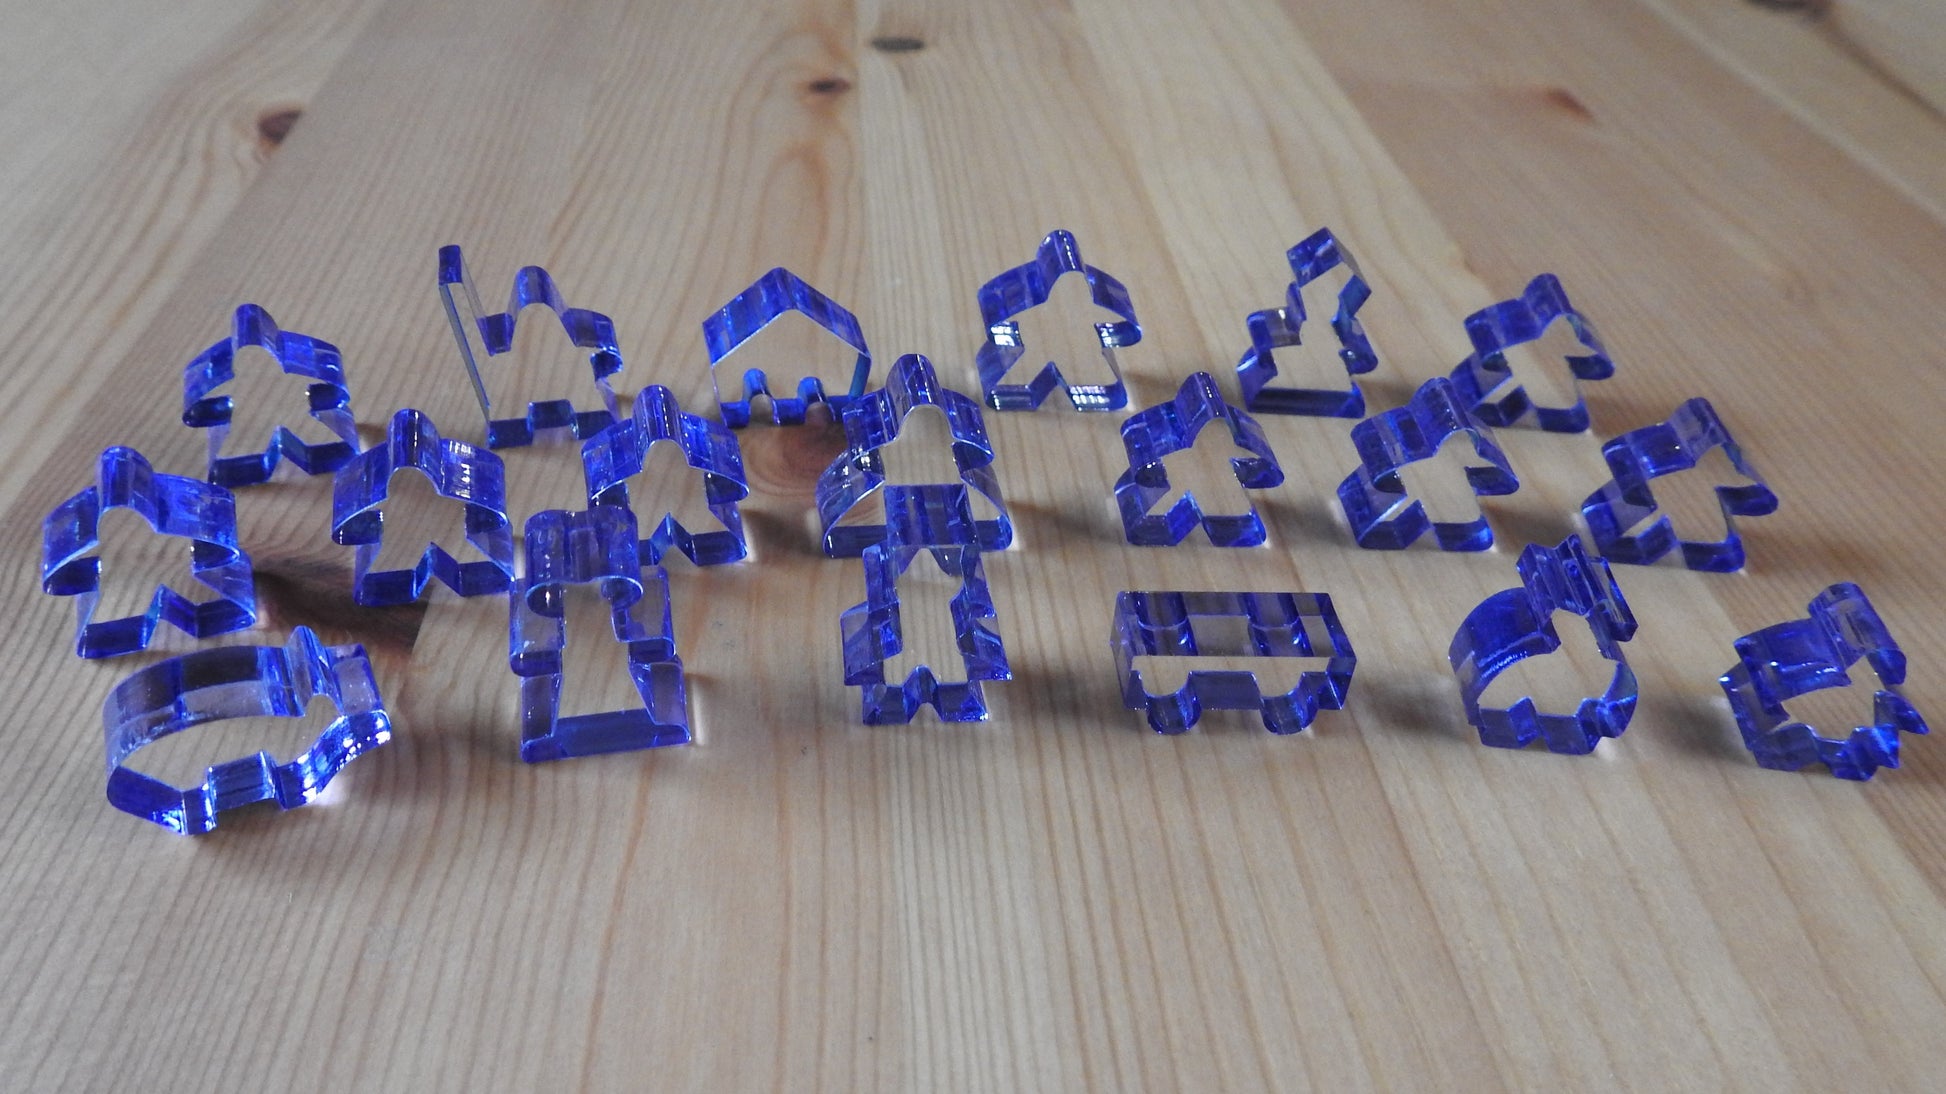 Close-up view of the blue transparent meeple set.